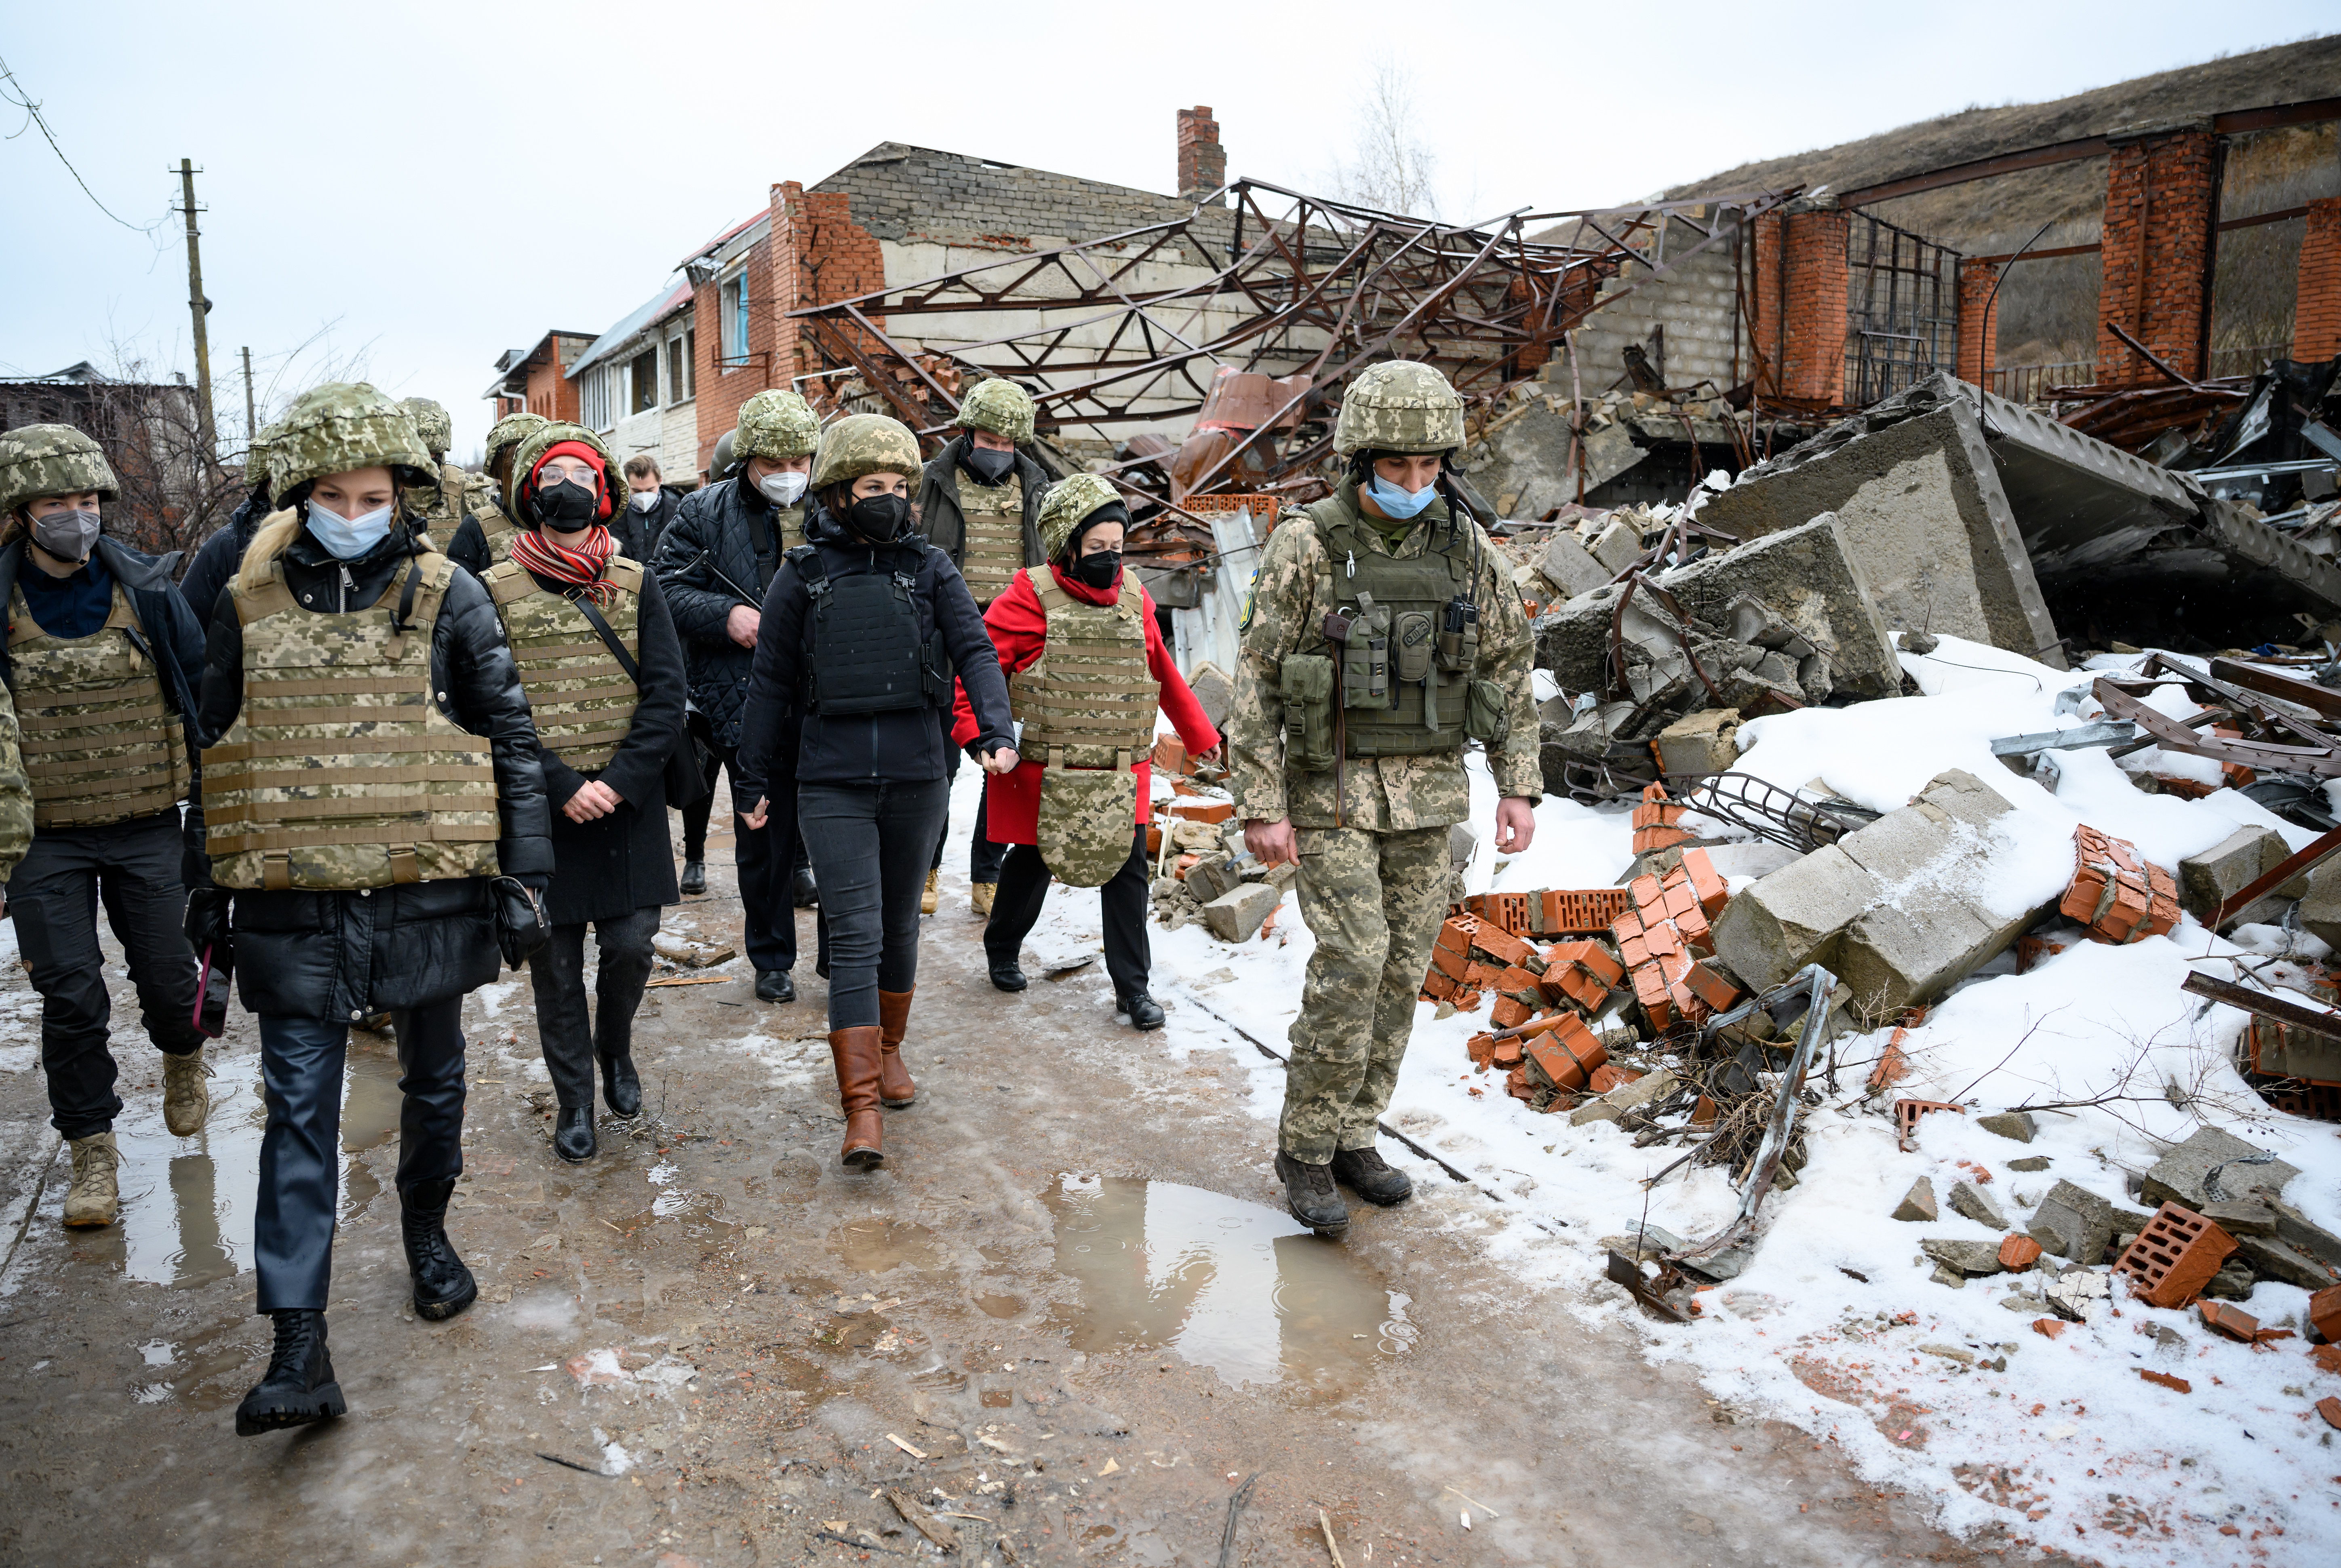 German Foreign Minister Annalena Baerbock walks along a street lined with destroyed buildings in Shyrokyne, Ukraine, on February 8, 2022.